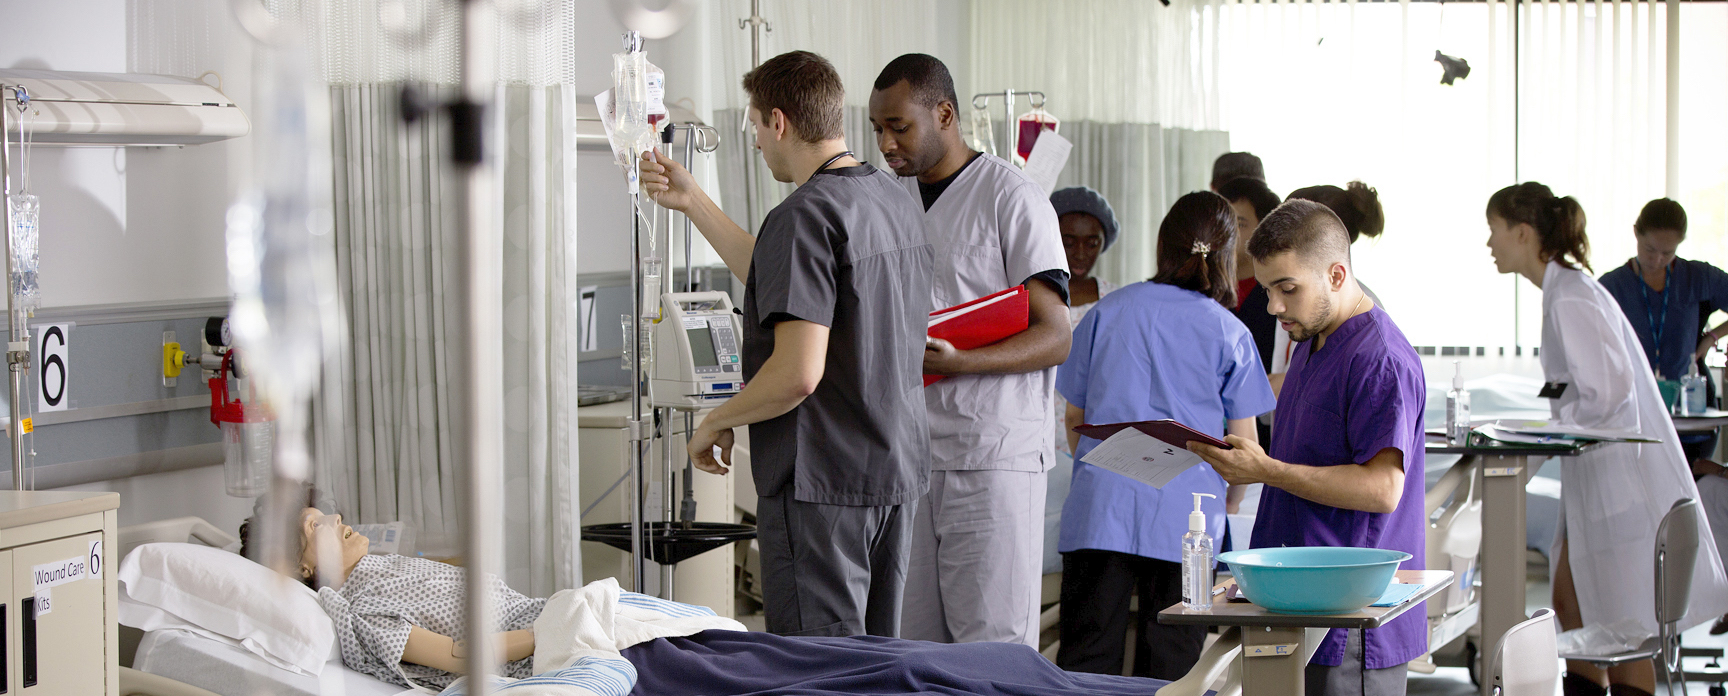 Nursing students standing next to a Nursing simulation dummy in a hospital